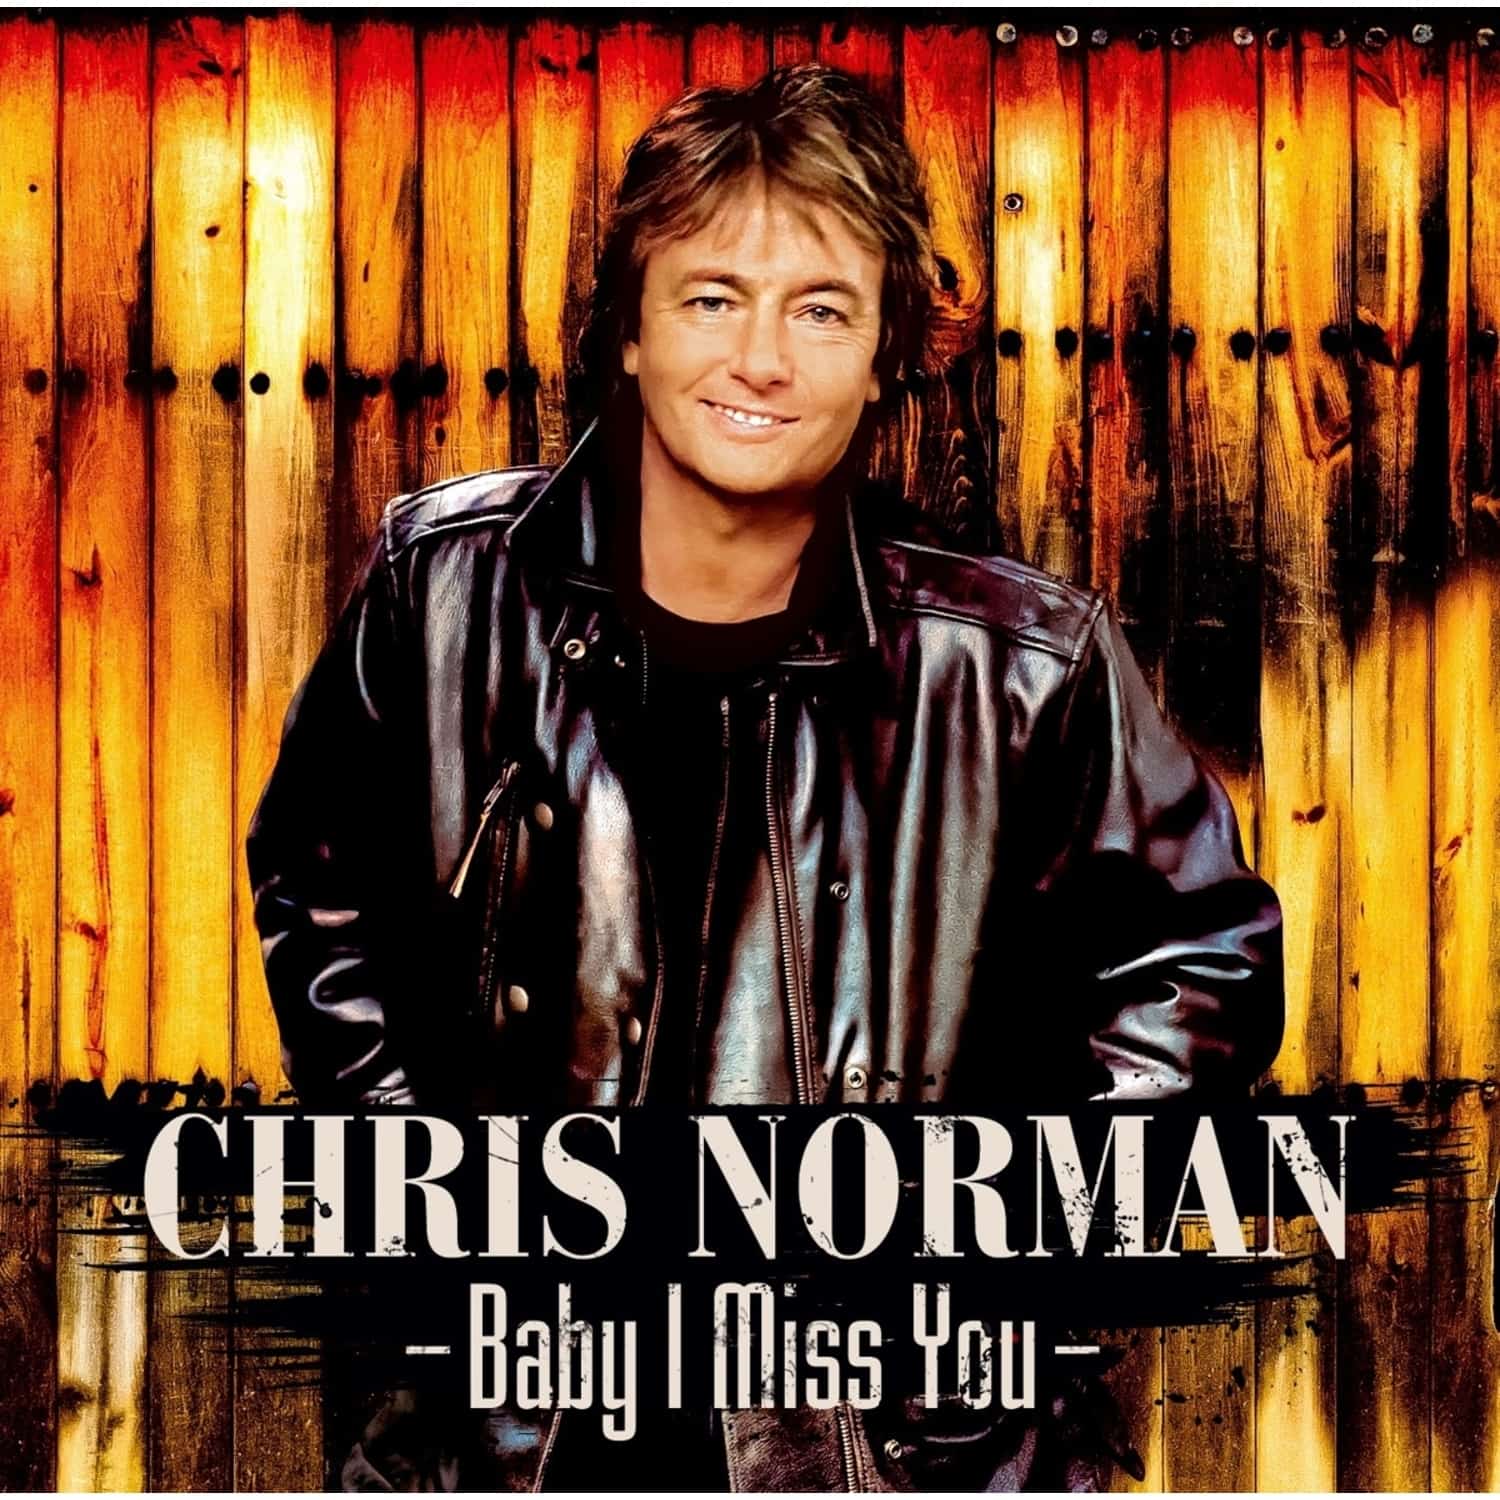 Chris Norman - BABY I MISS YOU 